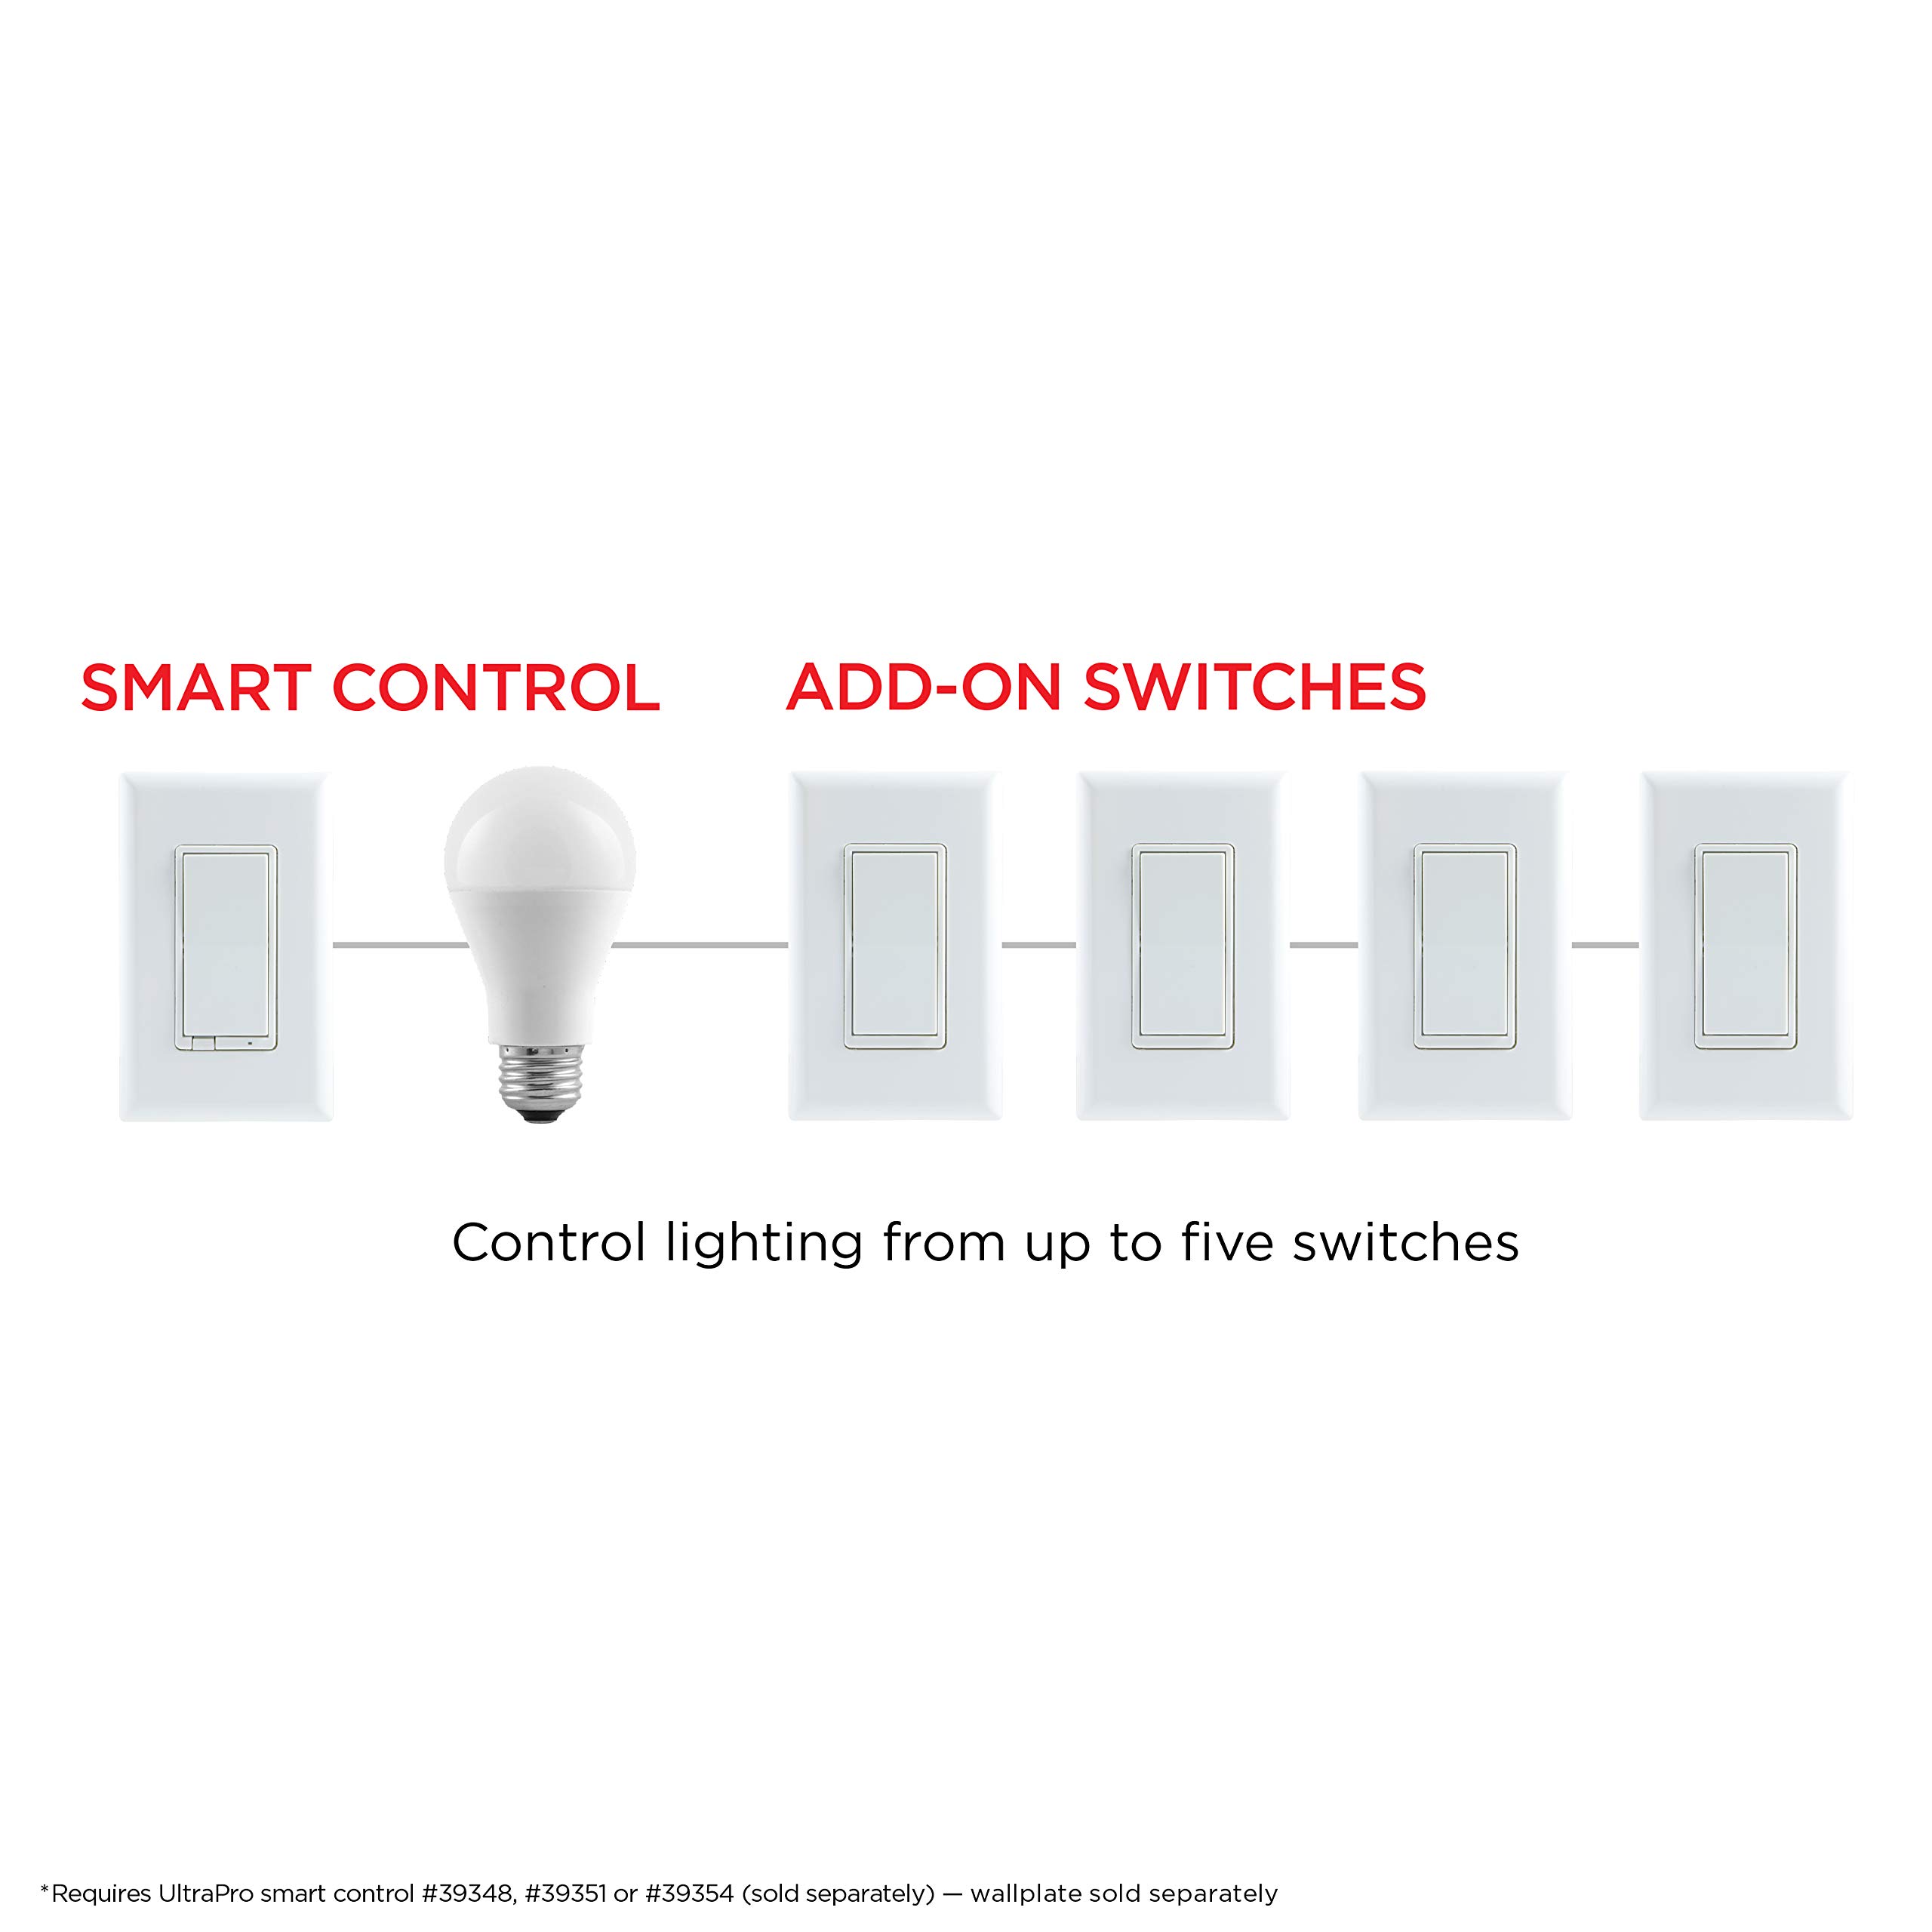 UltraPro Add-On Switch QuickFit and SimpleWire, In-Wall White Rocker Paddle Only, Z-Wave ZigBee Wireless Smart Lighting Controls, NOT A STANDALONE Switch, 39350